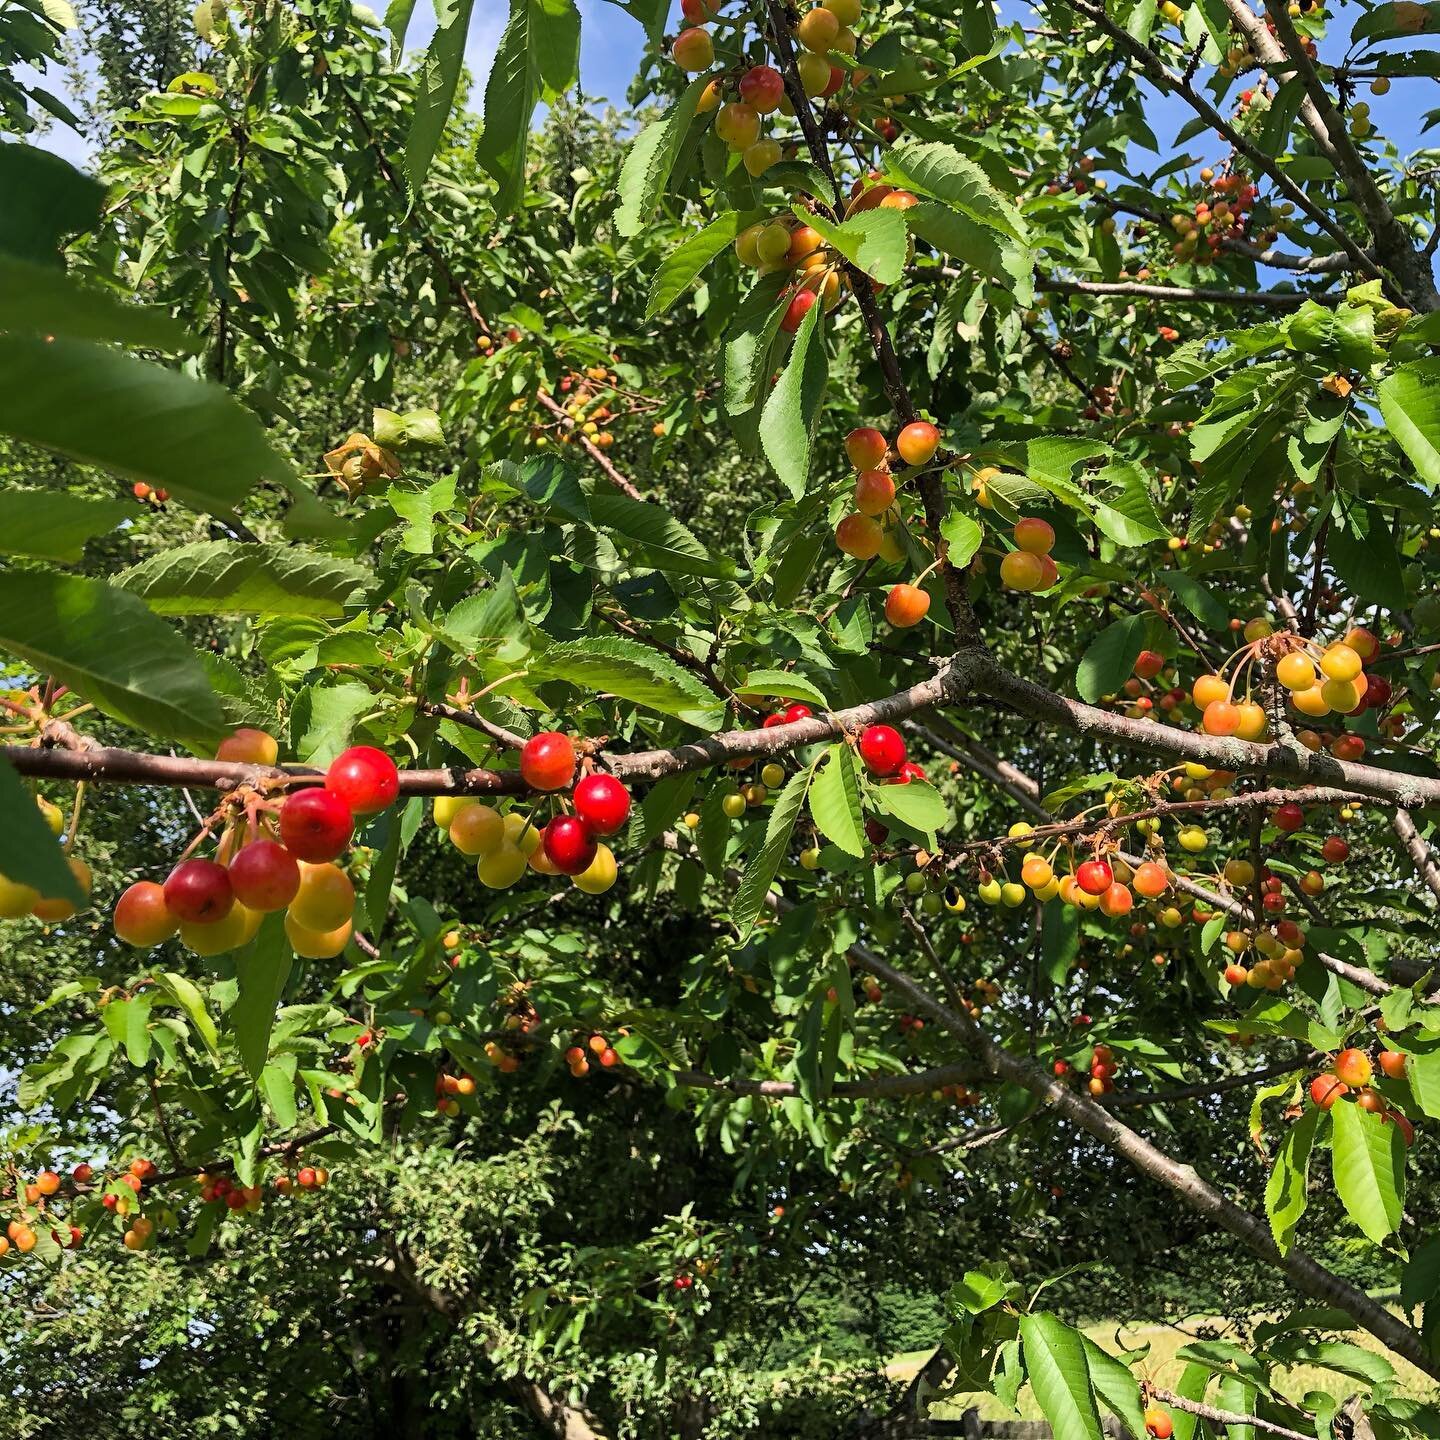 Look at all the cherries 🍒 The birds are gonna love these!